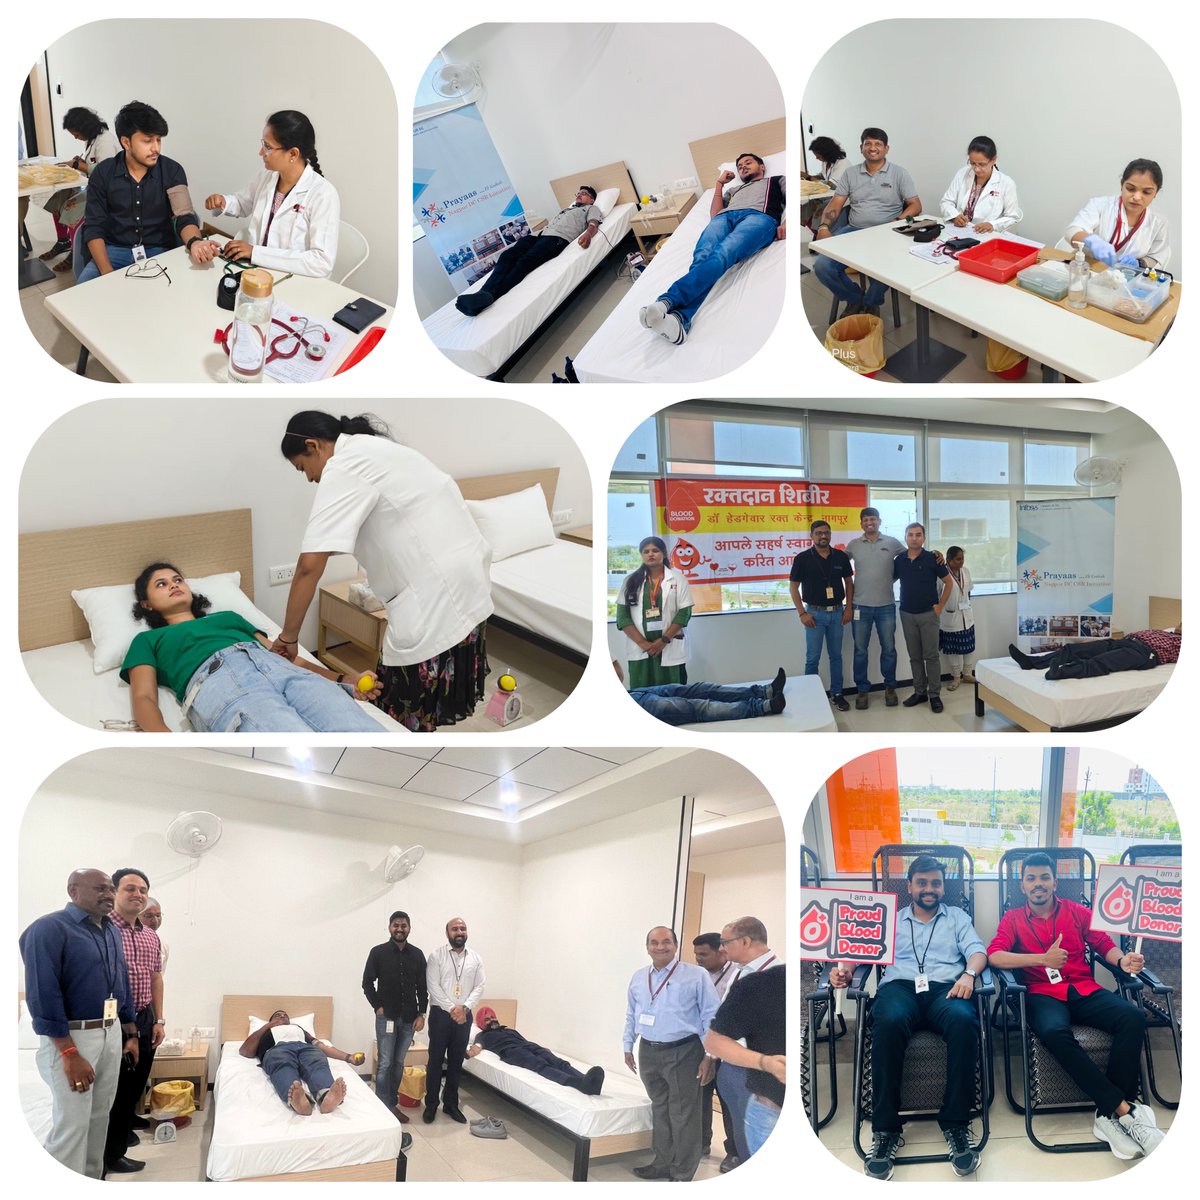 The appeal by Nagpur CSR Team – “Prayaas Ek Koshish” for Blood donation received an overwhelming response from Nagfoscions. A total of 125+ Nagfoscions came forward for this precious life-saving difference by selflessly participating in the Blood Donation camp. #InfosysNagpurDC